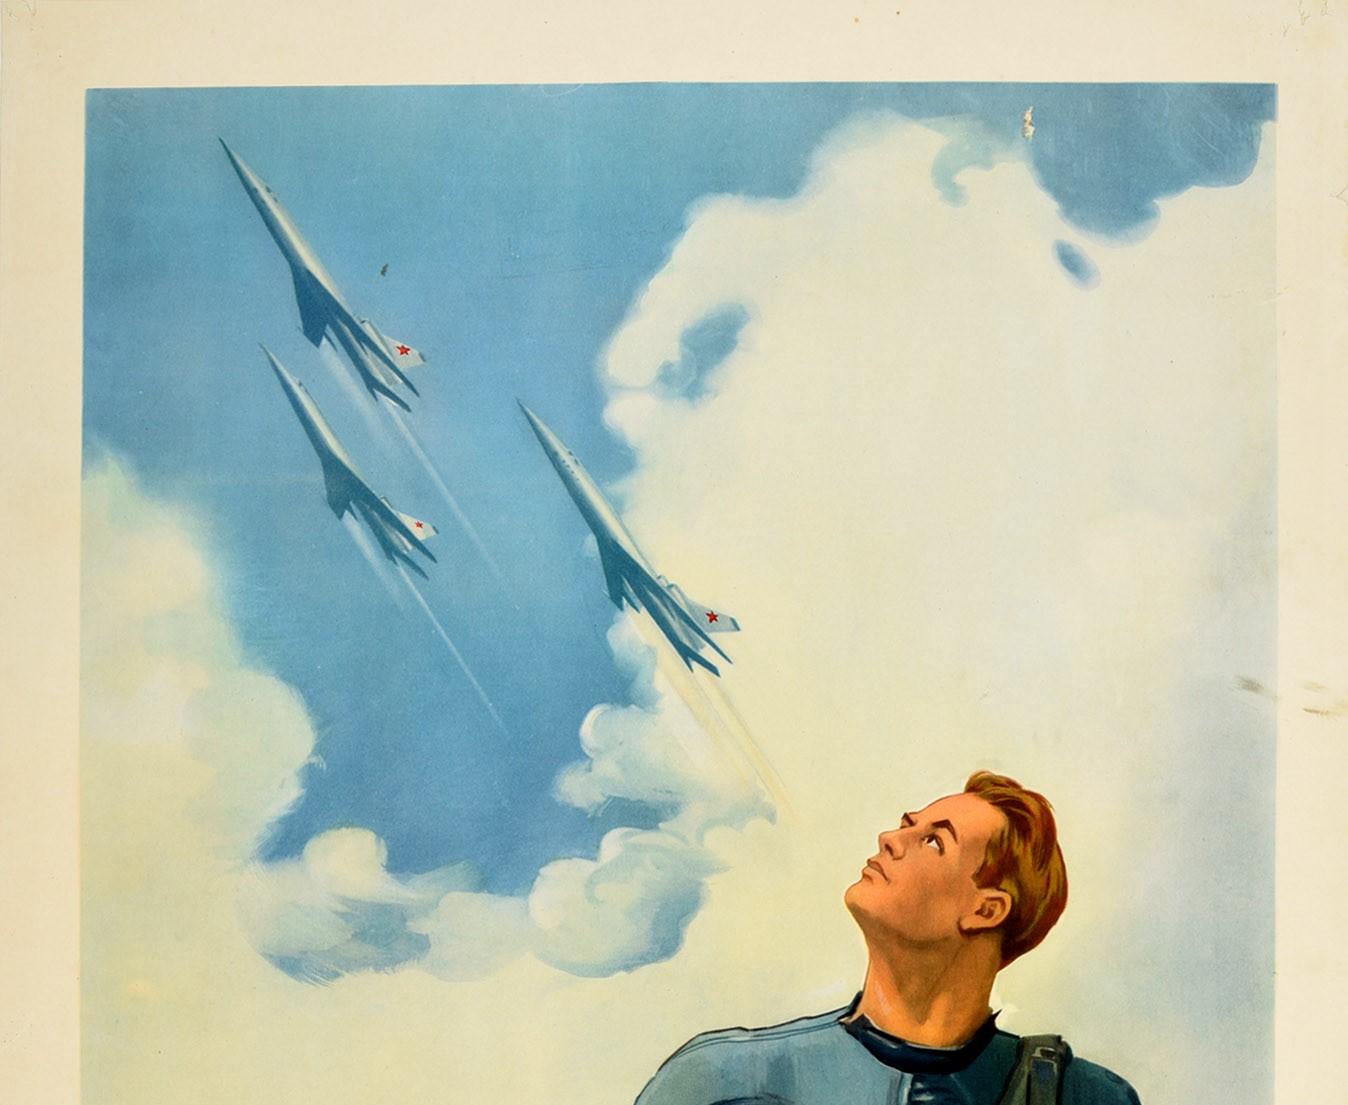 Original vintage Soviet propaganda poster - The Sky Loves The Brave / ???? ????? ???????? - featuring a pilot in uniform holding a helmet and looking up at fighter jet planes marked with red Soviet stars flying through the clouds above, the bold red